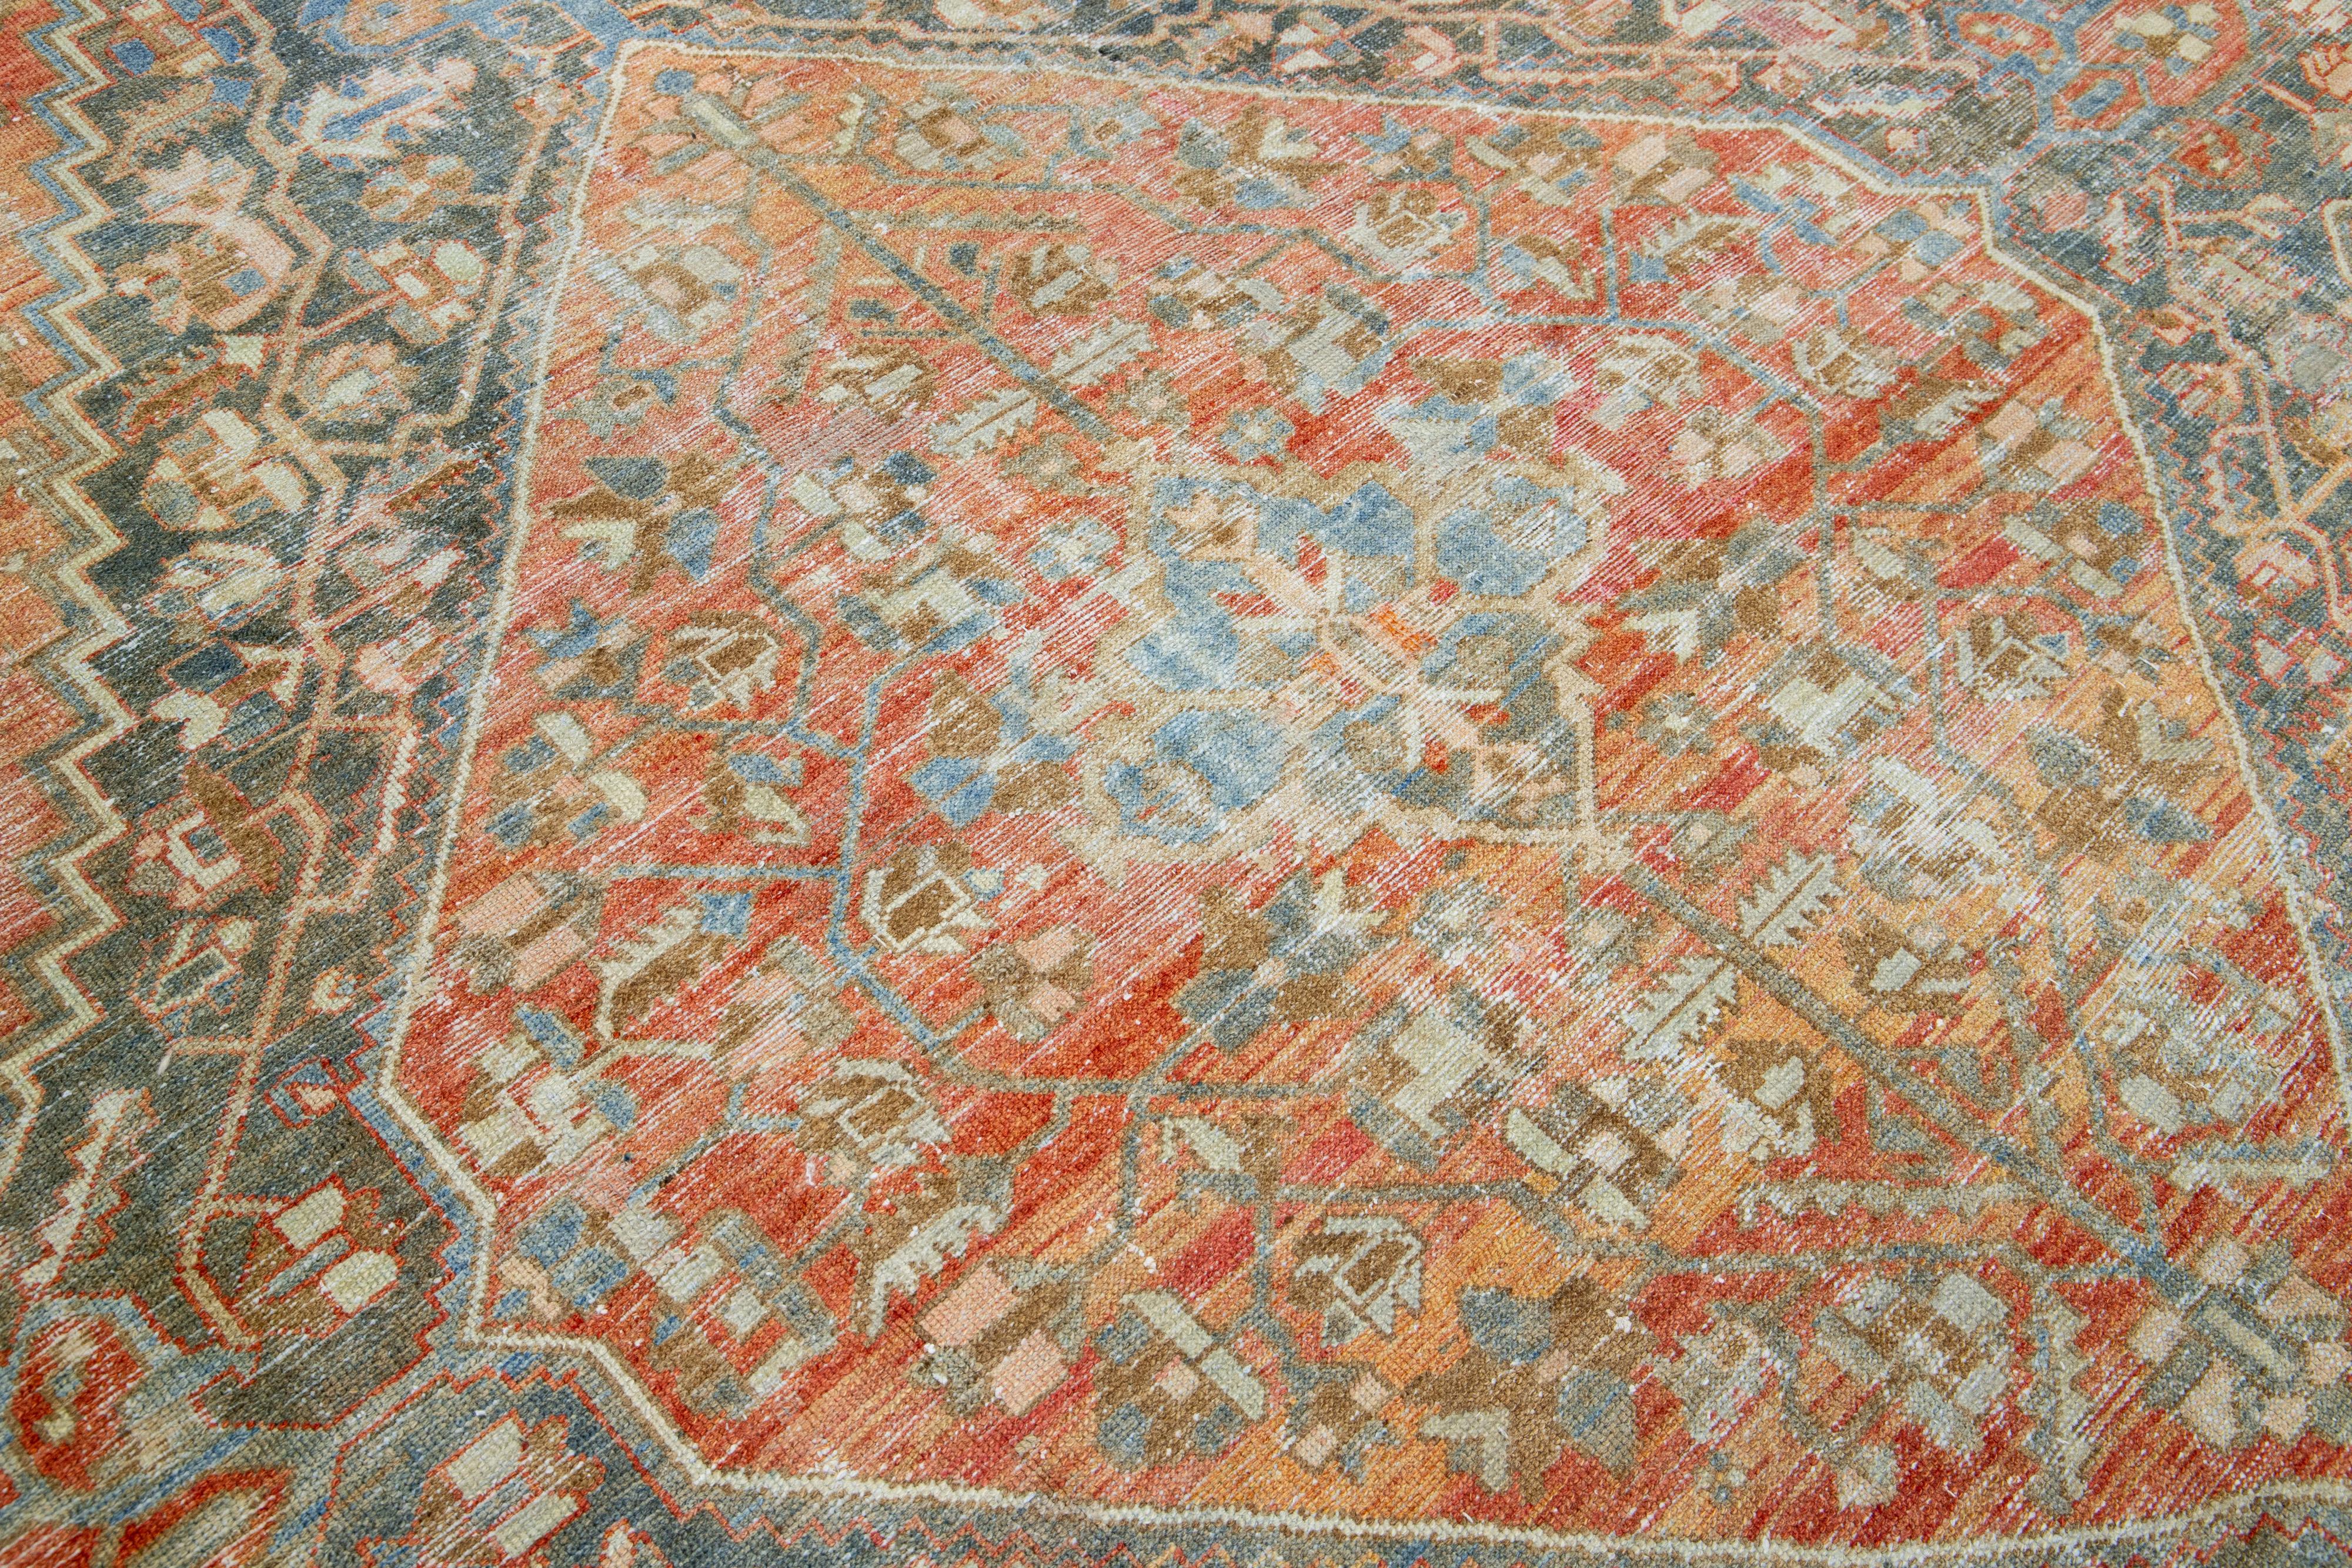 Allover 1900s Antique Persian Bakhtiari Wool Rug In Rust Color  For Sale 1